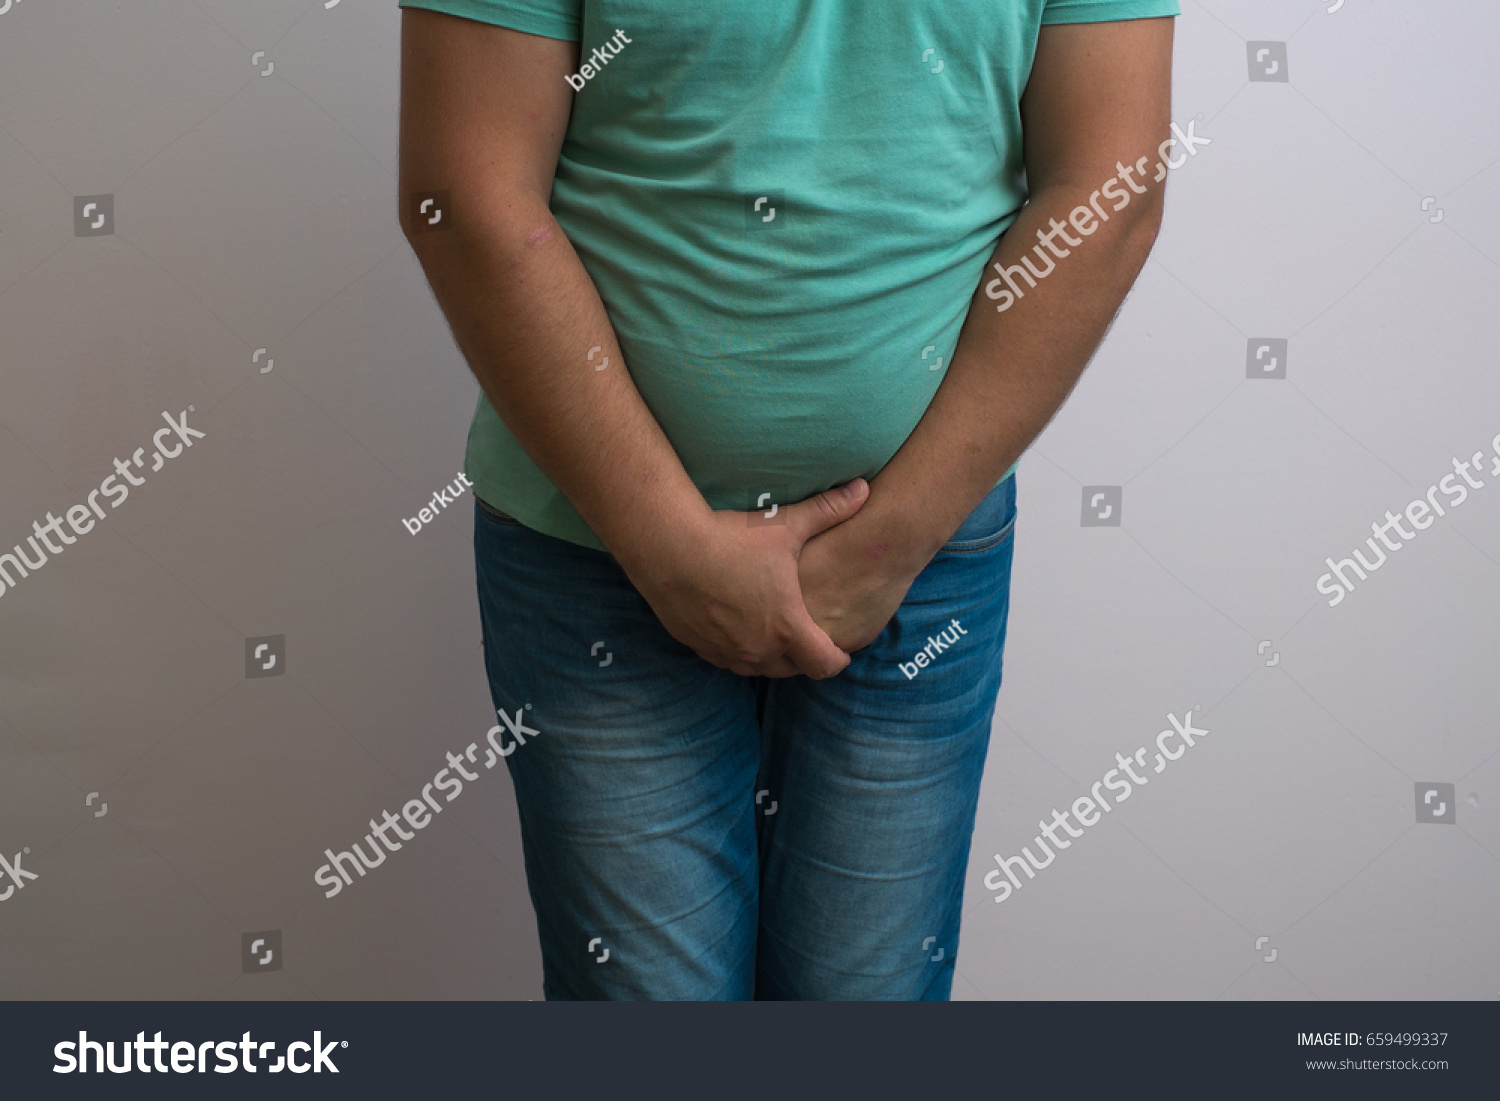 Man Hands Holding His Crotch He Stock Photo 659499337 Shutterstock